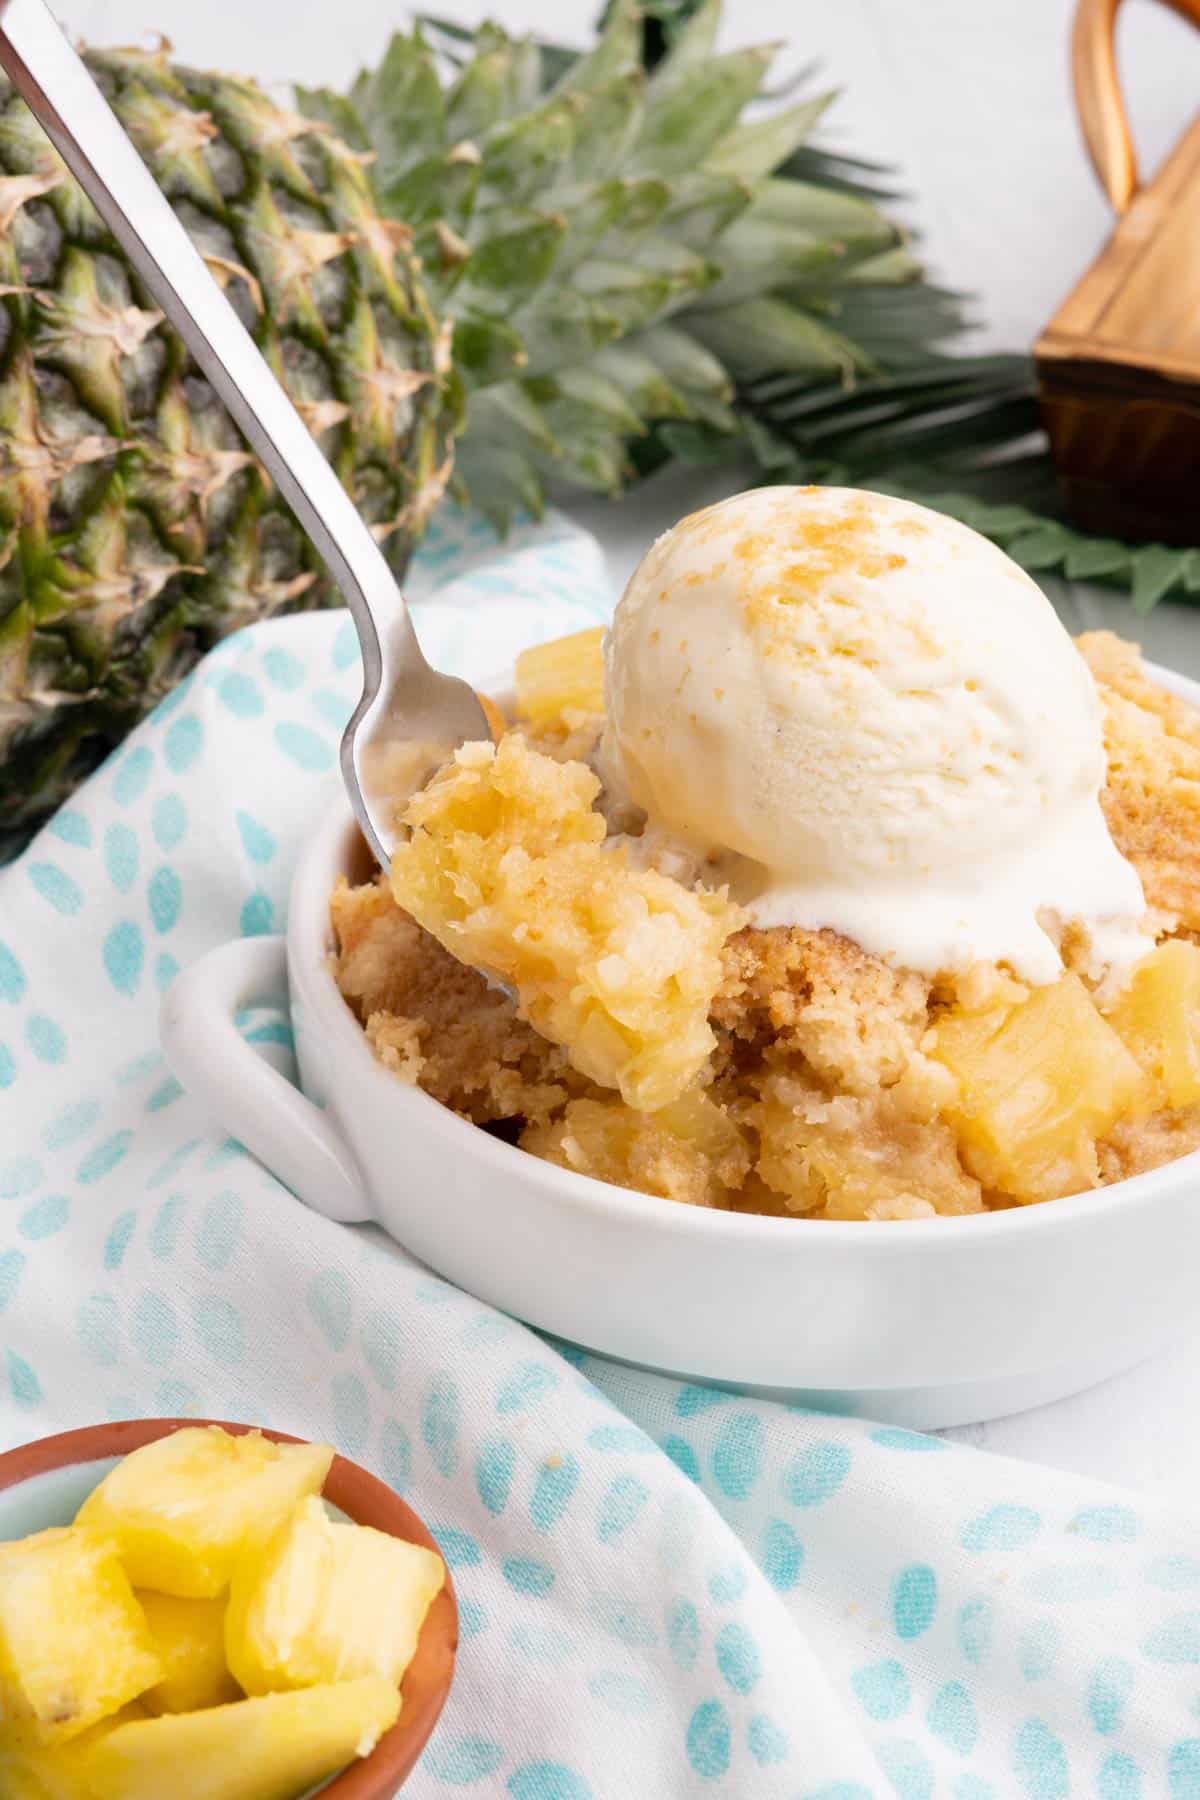 A spoonful of pineapple cake over the bowl of dessert.